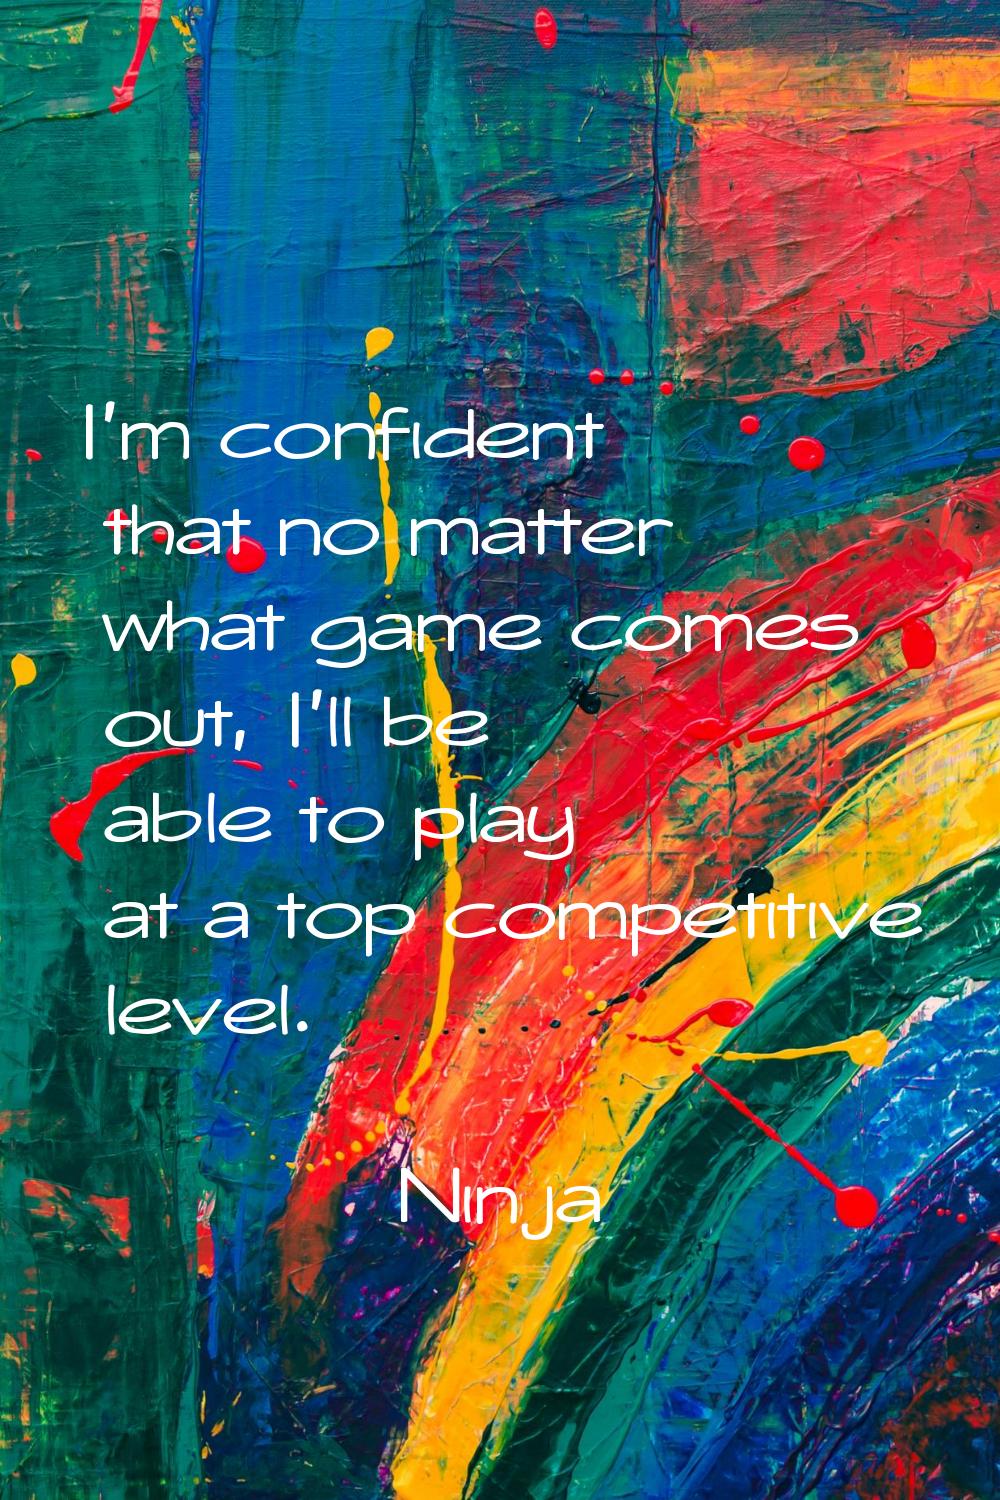 I'm confident that no matter what game comes out, I'll be able to play at a top competitive level.